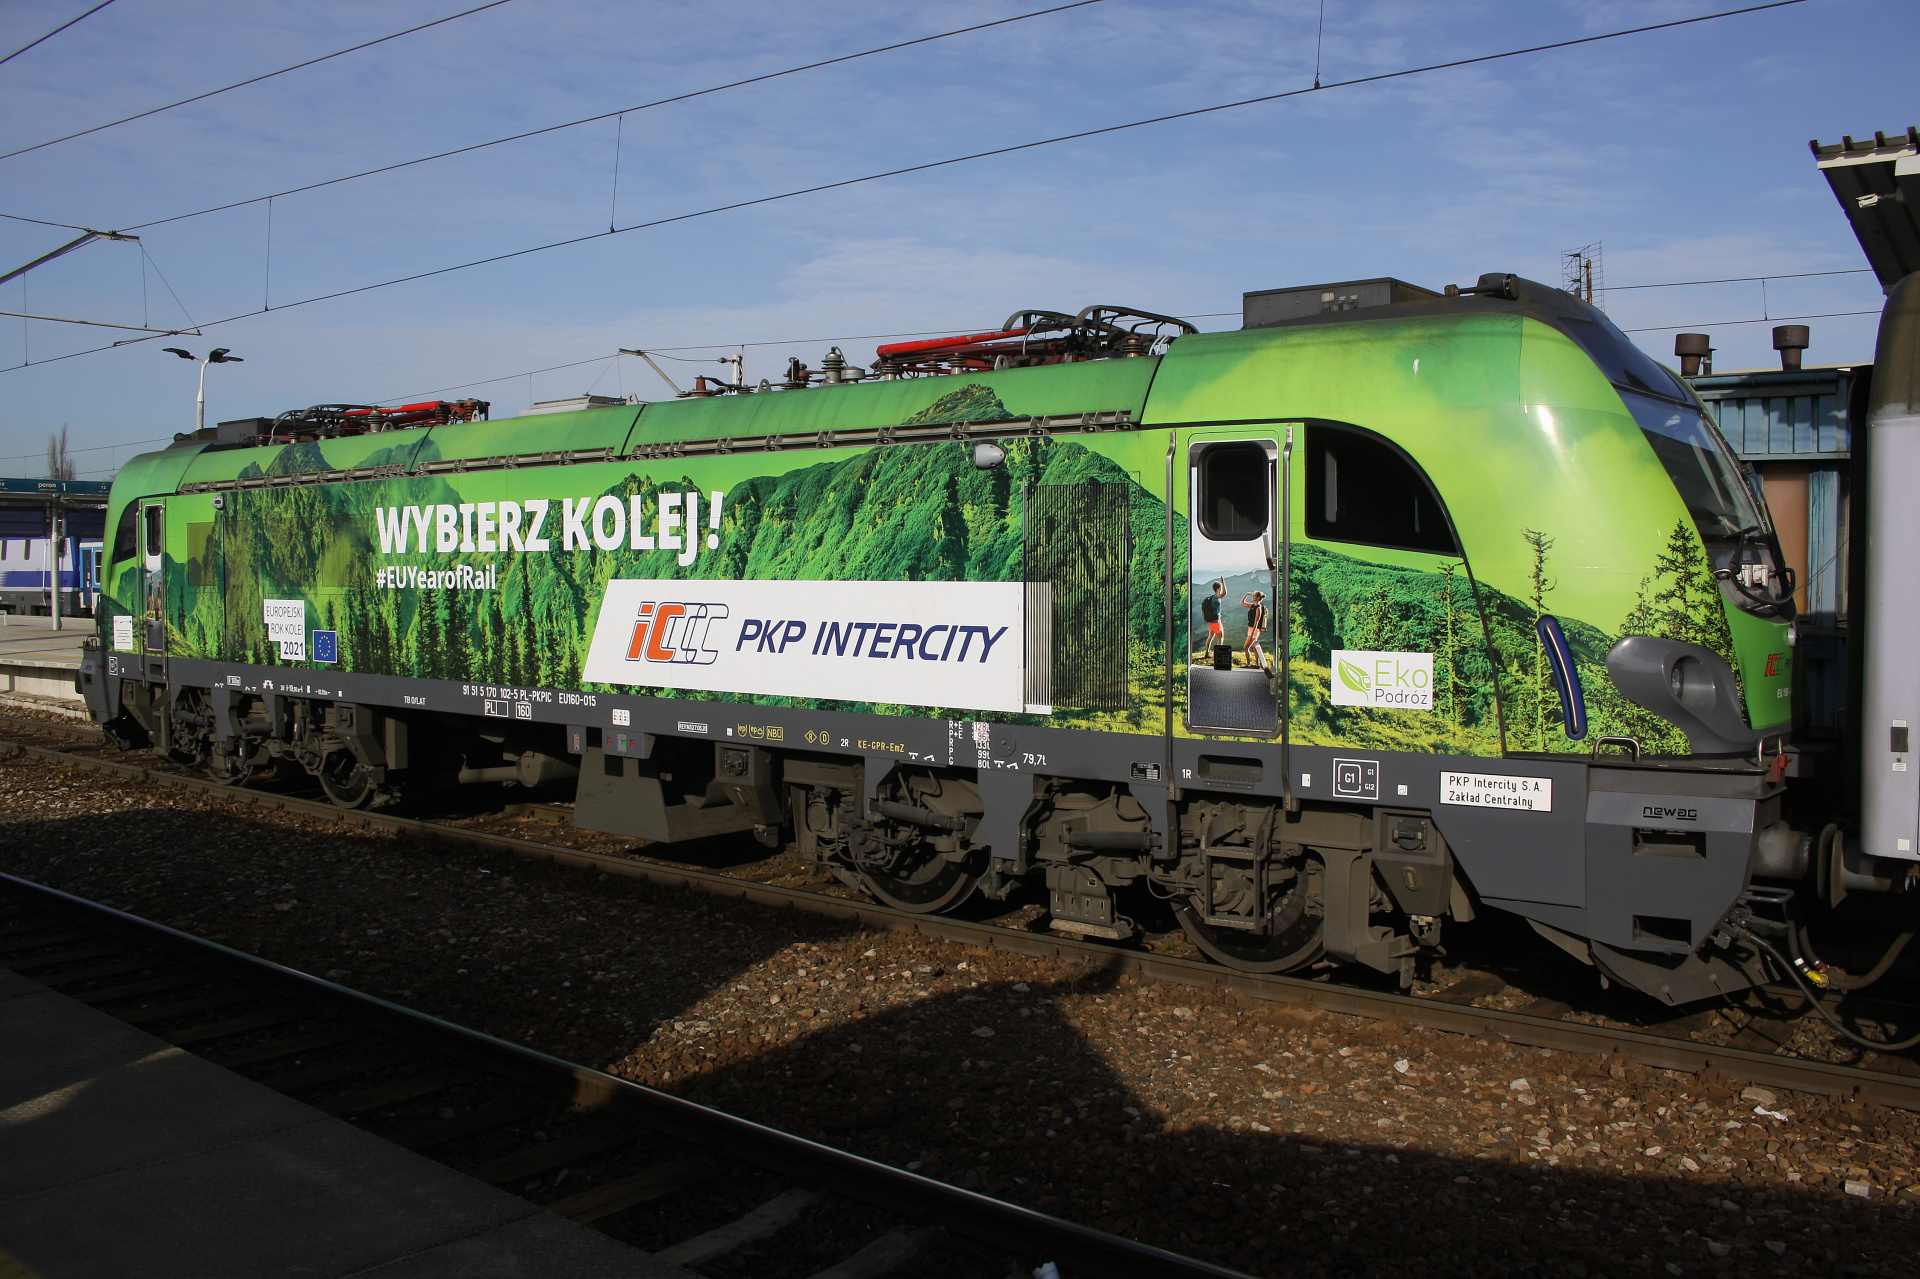 E4DCU EU160-015 (European Year of the Rail 2021 livery) (Vehicles » Trains and Locomotives » Newag Griffin)